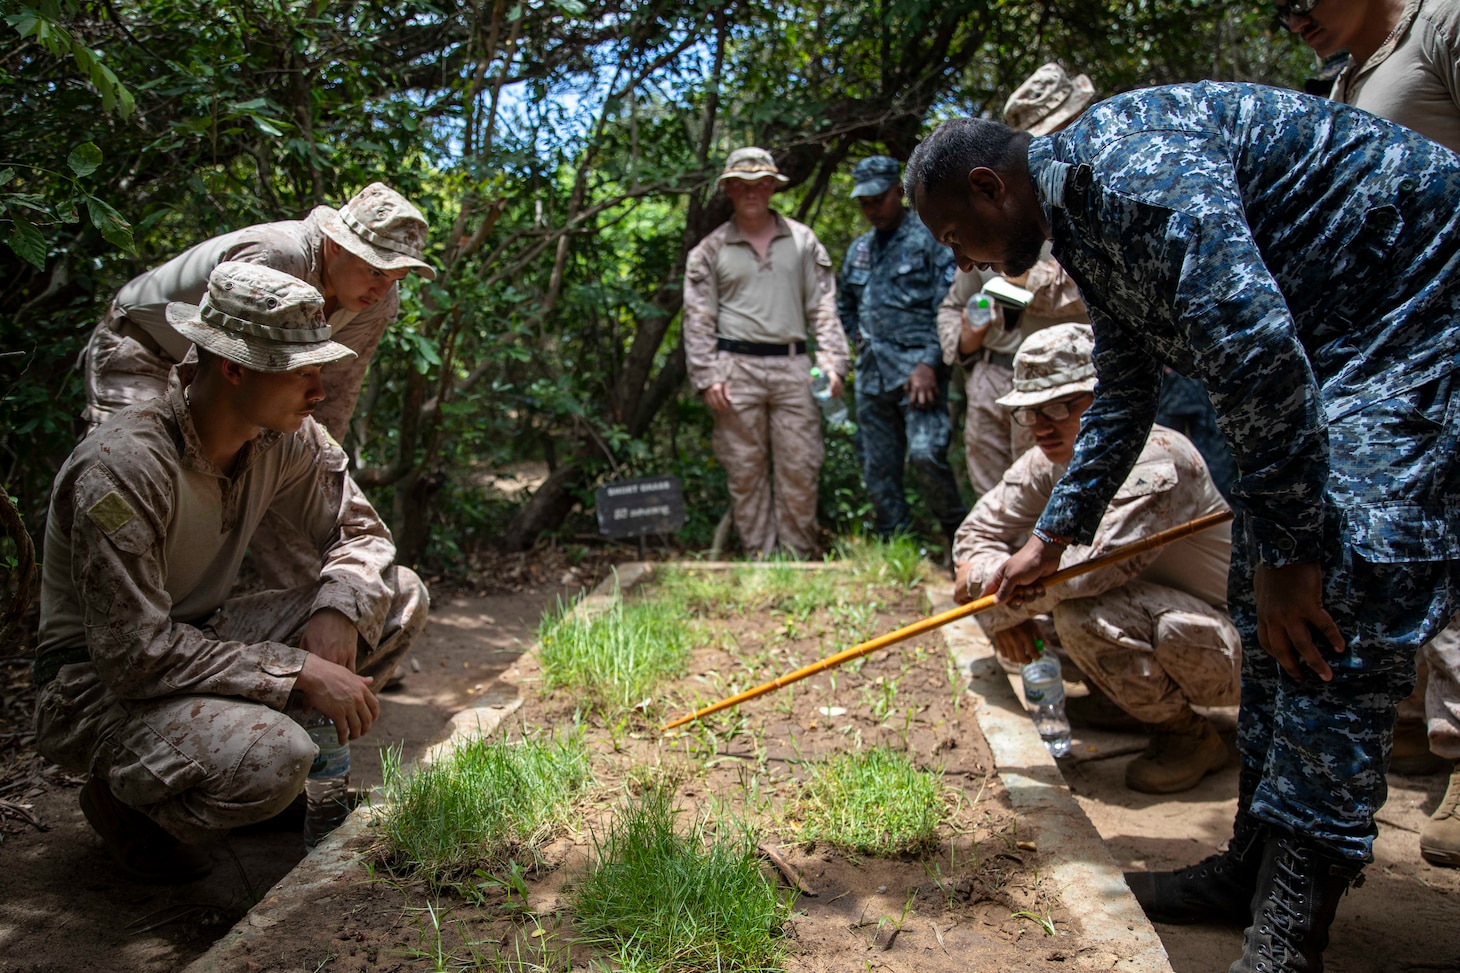 A member of the Sri Lanka Navy (SLN) teaches U.S. Marines assigned to Fleet Anti-Terrorism Security Team Pacific tracking techniques in grassy areas as part of exercise Cooperation Afloat Readiness and Training (CARAT) Sri Lanka 2024 at SLNS Vidura, April 23. CARAT Sri Lanka is a bilateral exercise between Sri Lanka and the United States designed to promote regional security cooperation and strengthen maritime understanding, partnerships, and interoperability. In its 29th year, the CARAT series is comprised of multinational exercises, designed to enhance U.S. and partner forces’ abilities to operate together in response to traditional and non-traditional maritime security challenges in the Indo-Pacific region. (U.S. Navy photo by Mass Communication Specialist 1st Class Charles Oki)